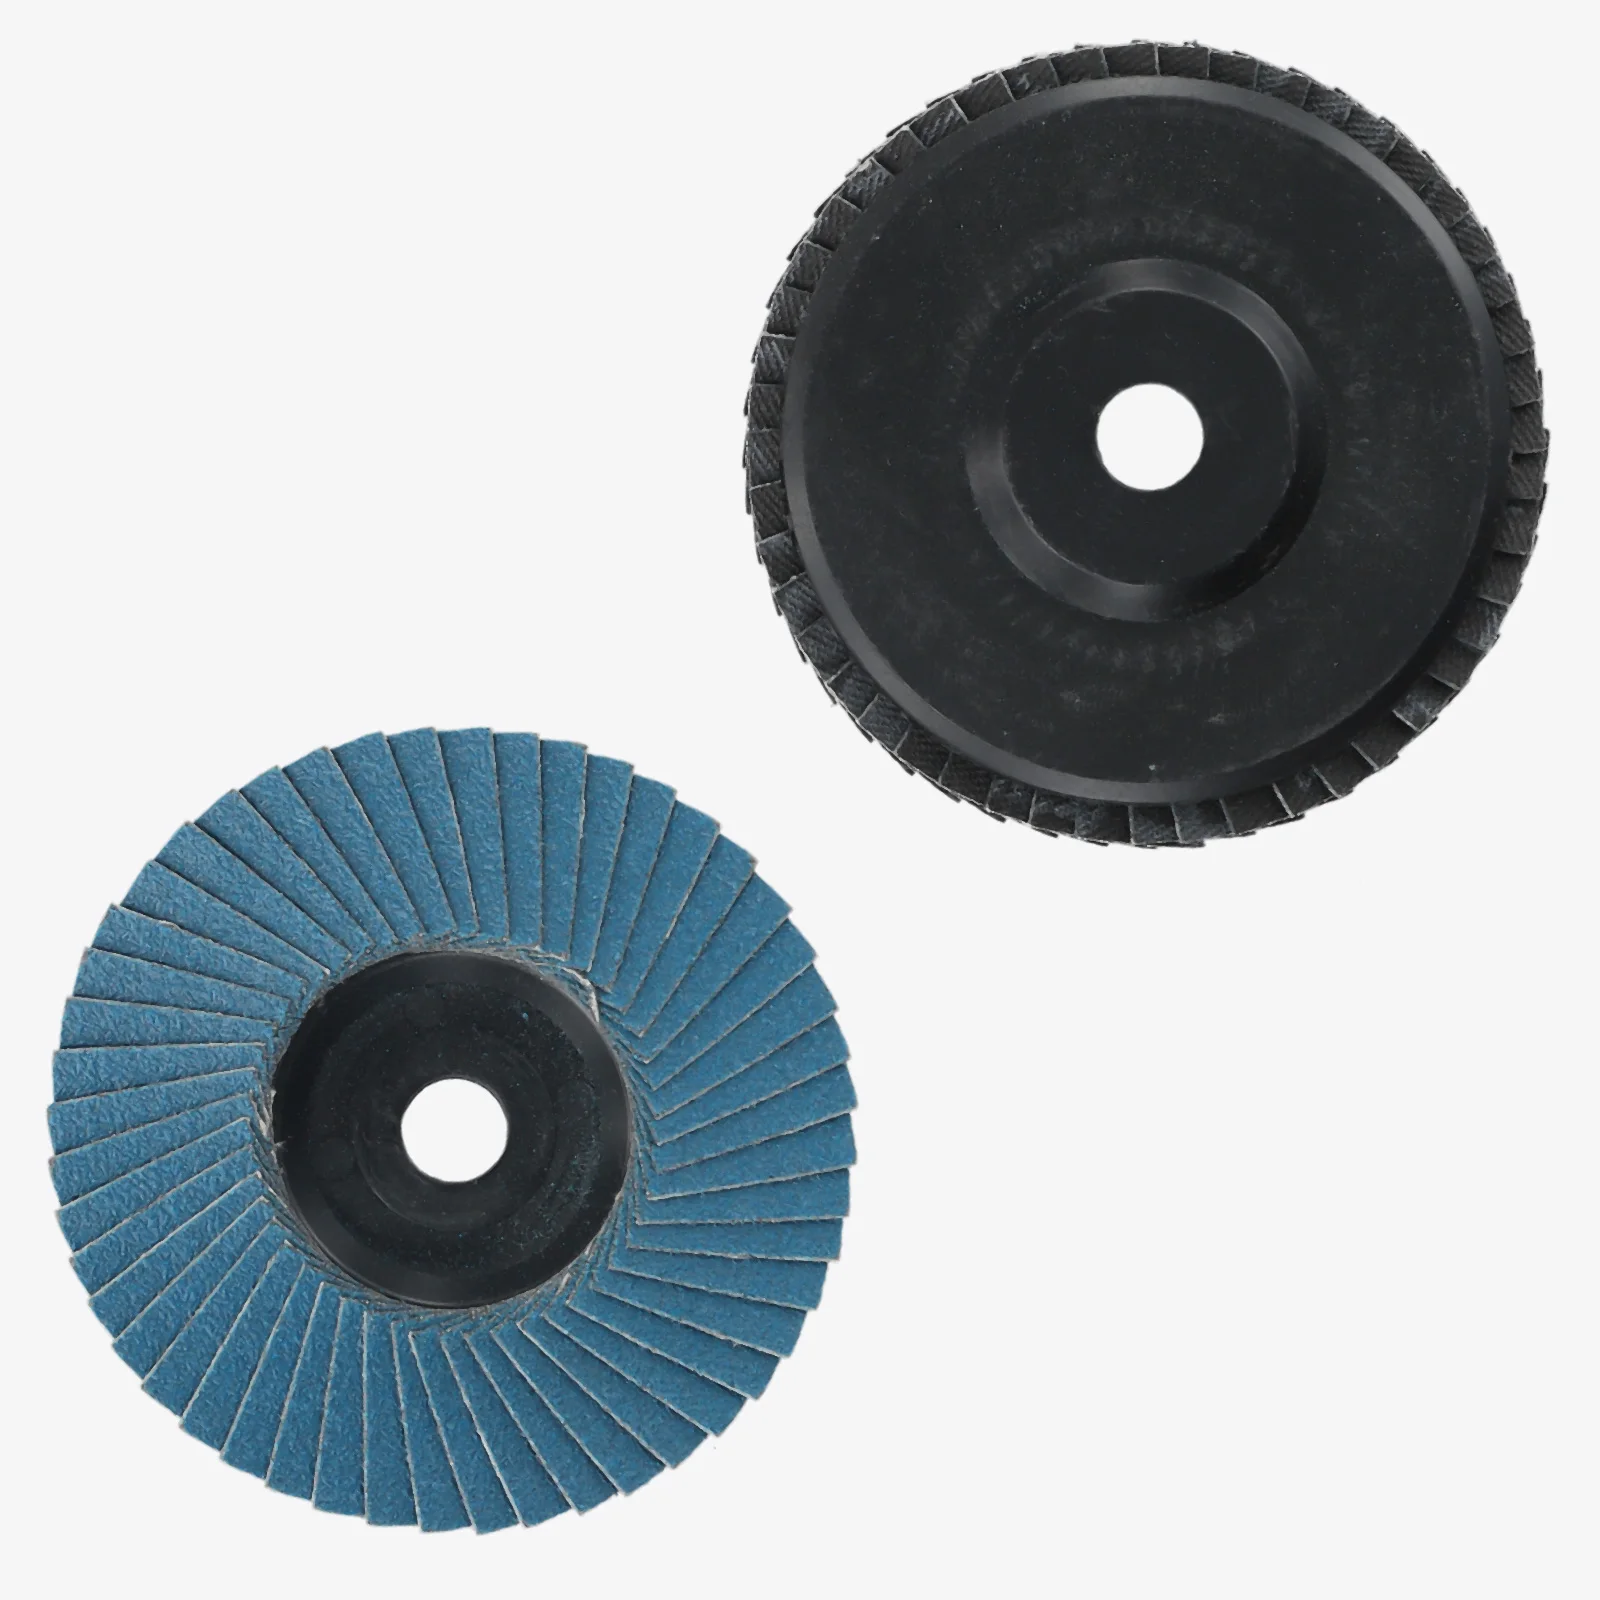 

Polishing Tools For Carpentry In Wood Accessories Flat Flap Discs 75mm Grinding Wheels Cutting For Angle Grinder 3pcs 3 Inch